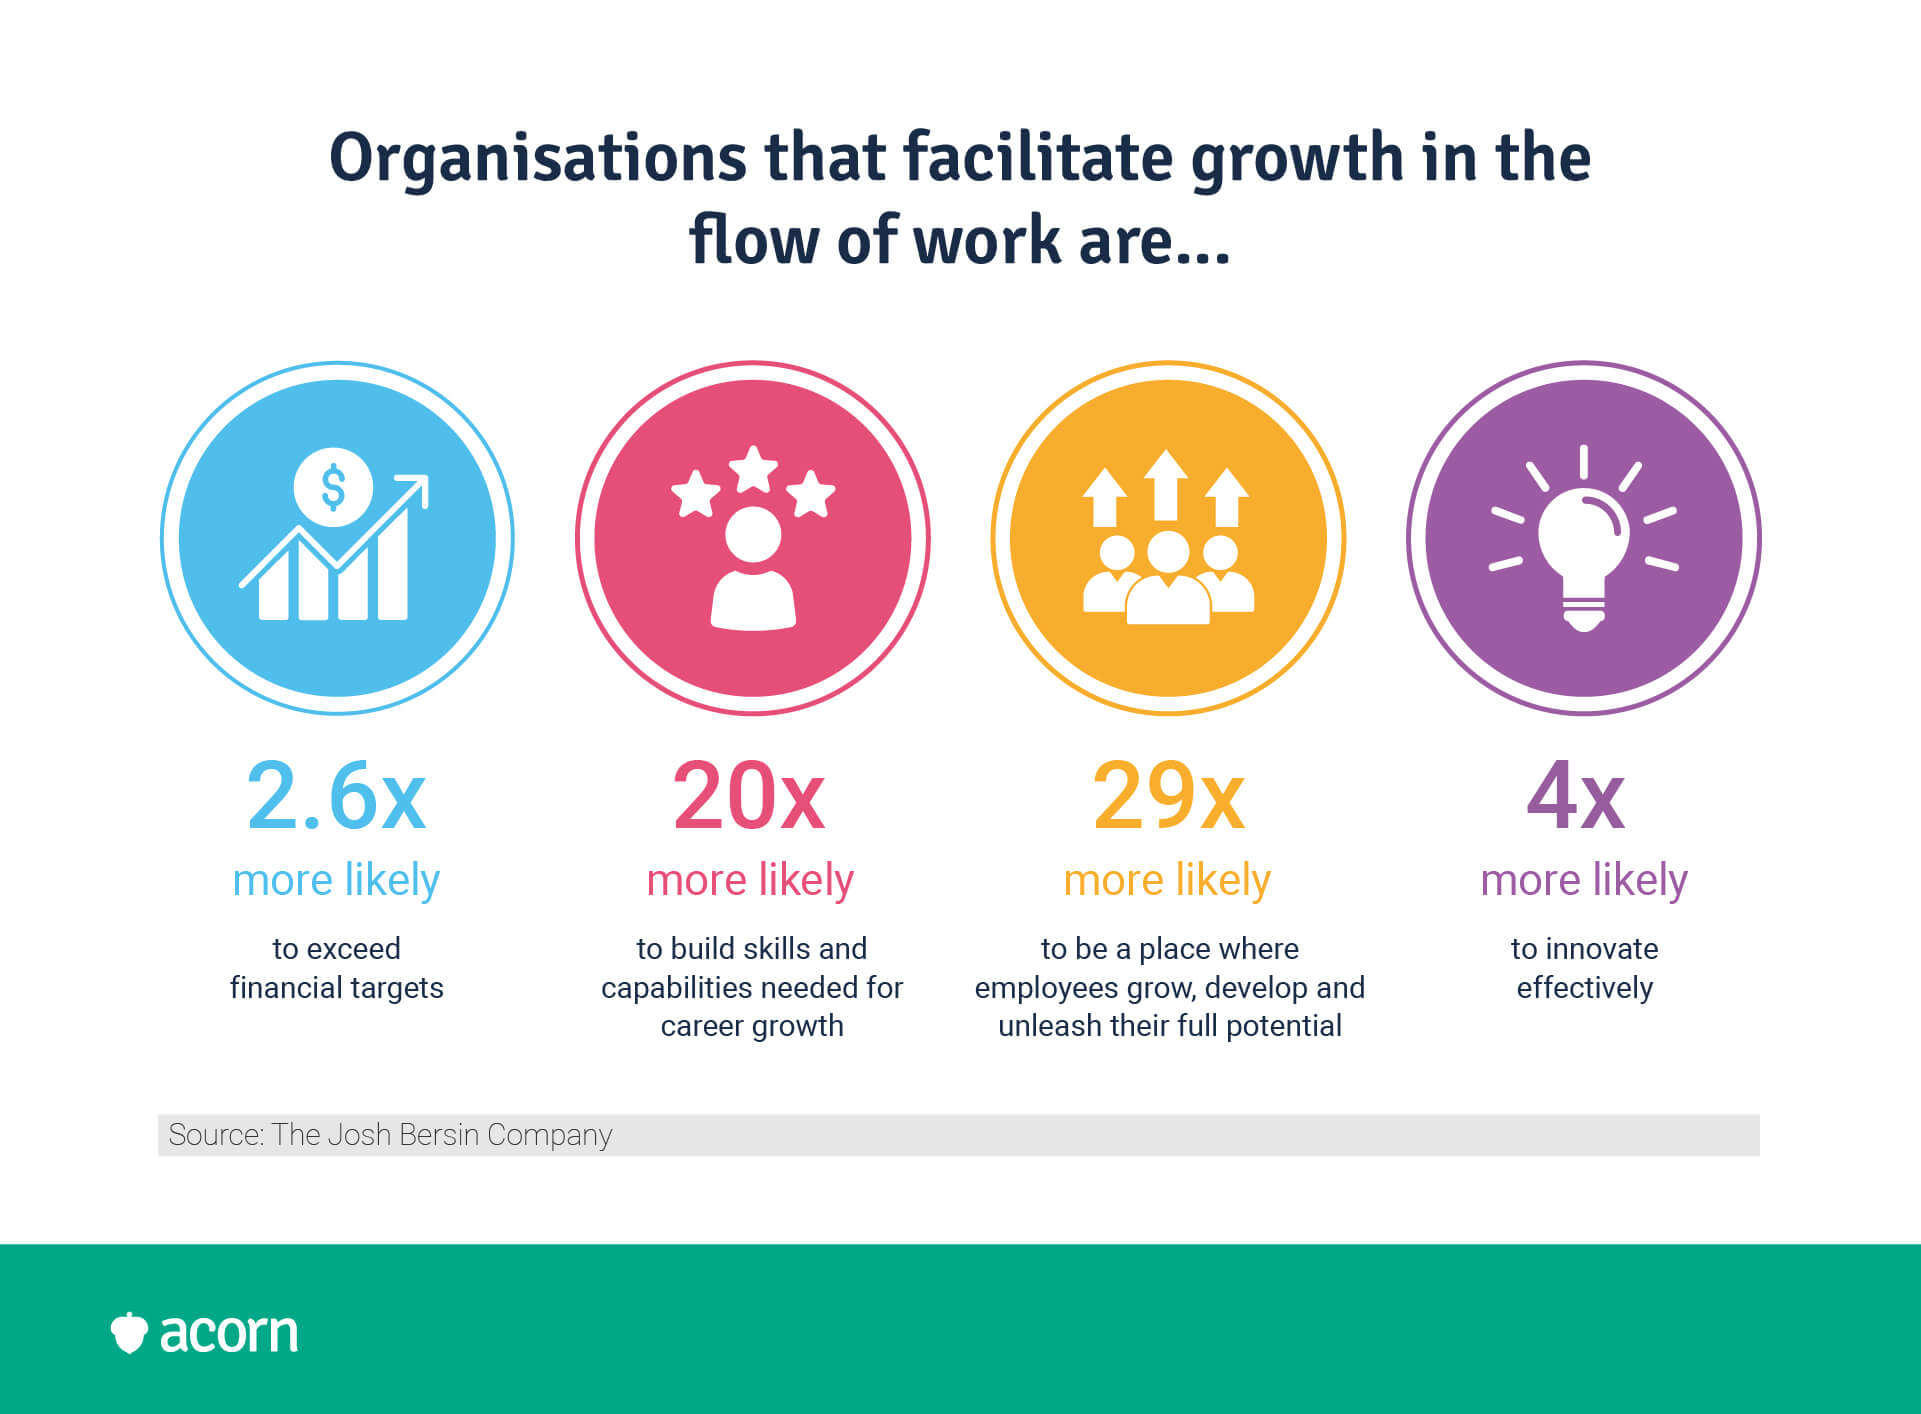 infographic of statistics showing the organisational benefits of providing growth opportunities in the flow of work